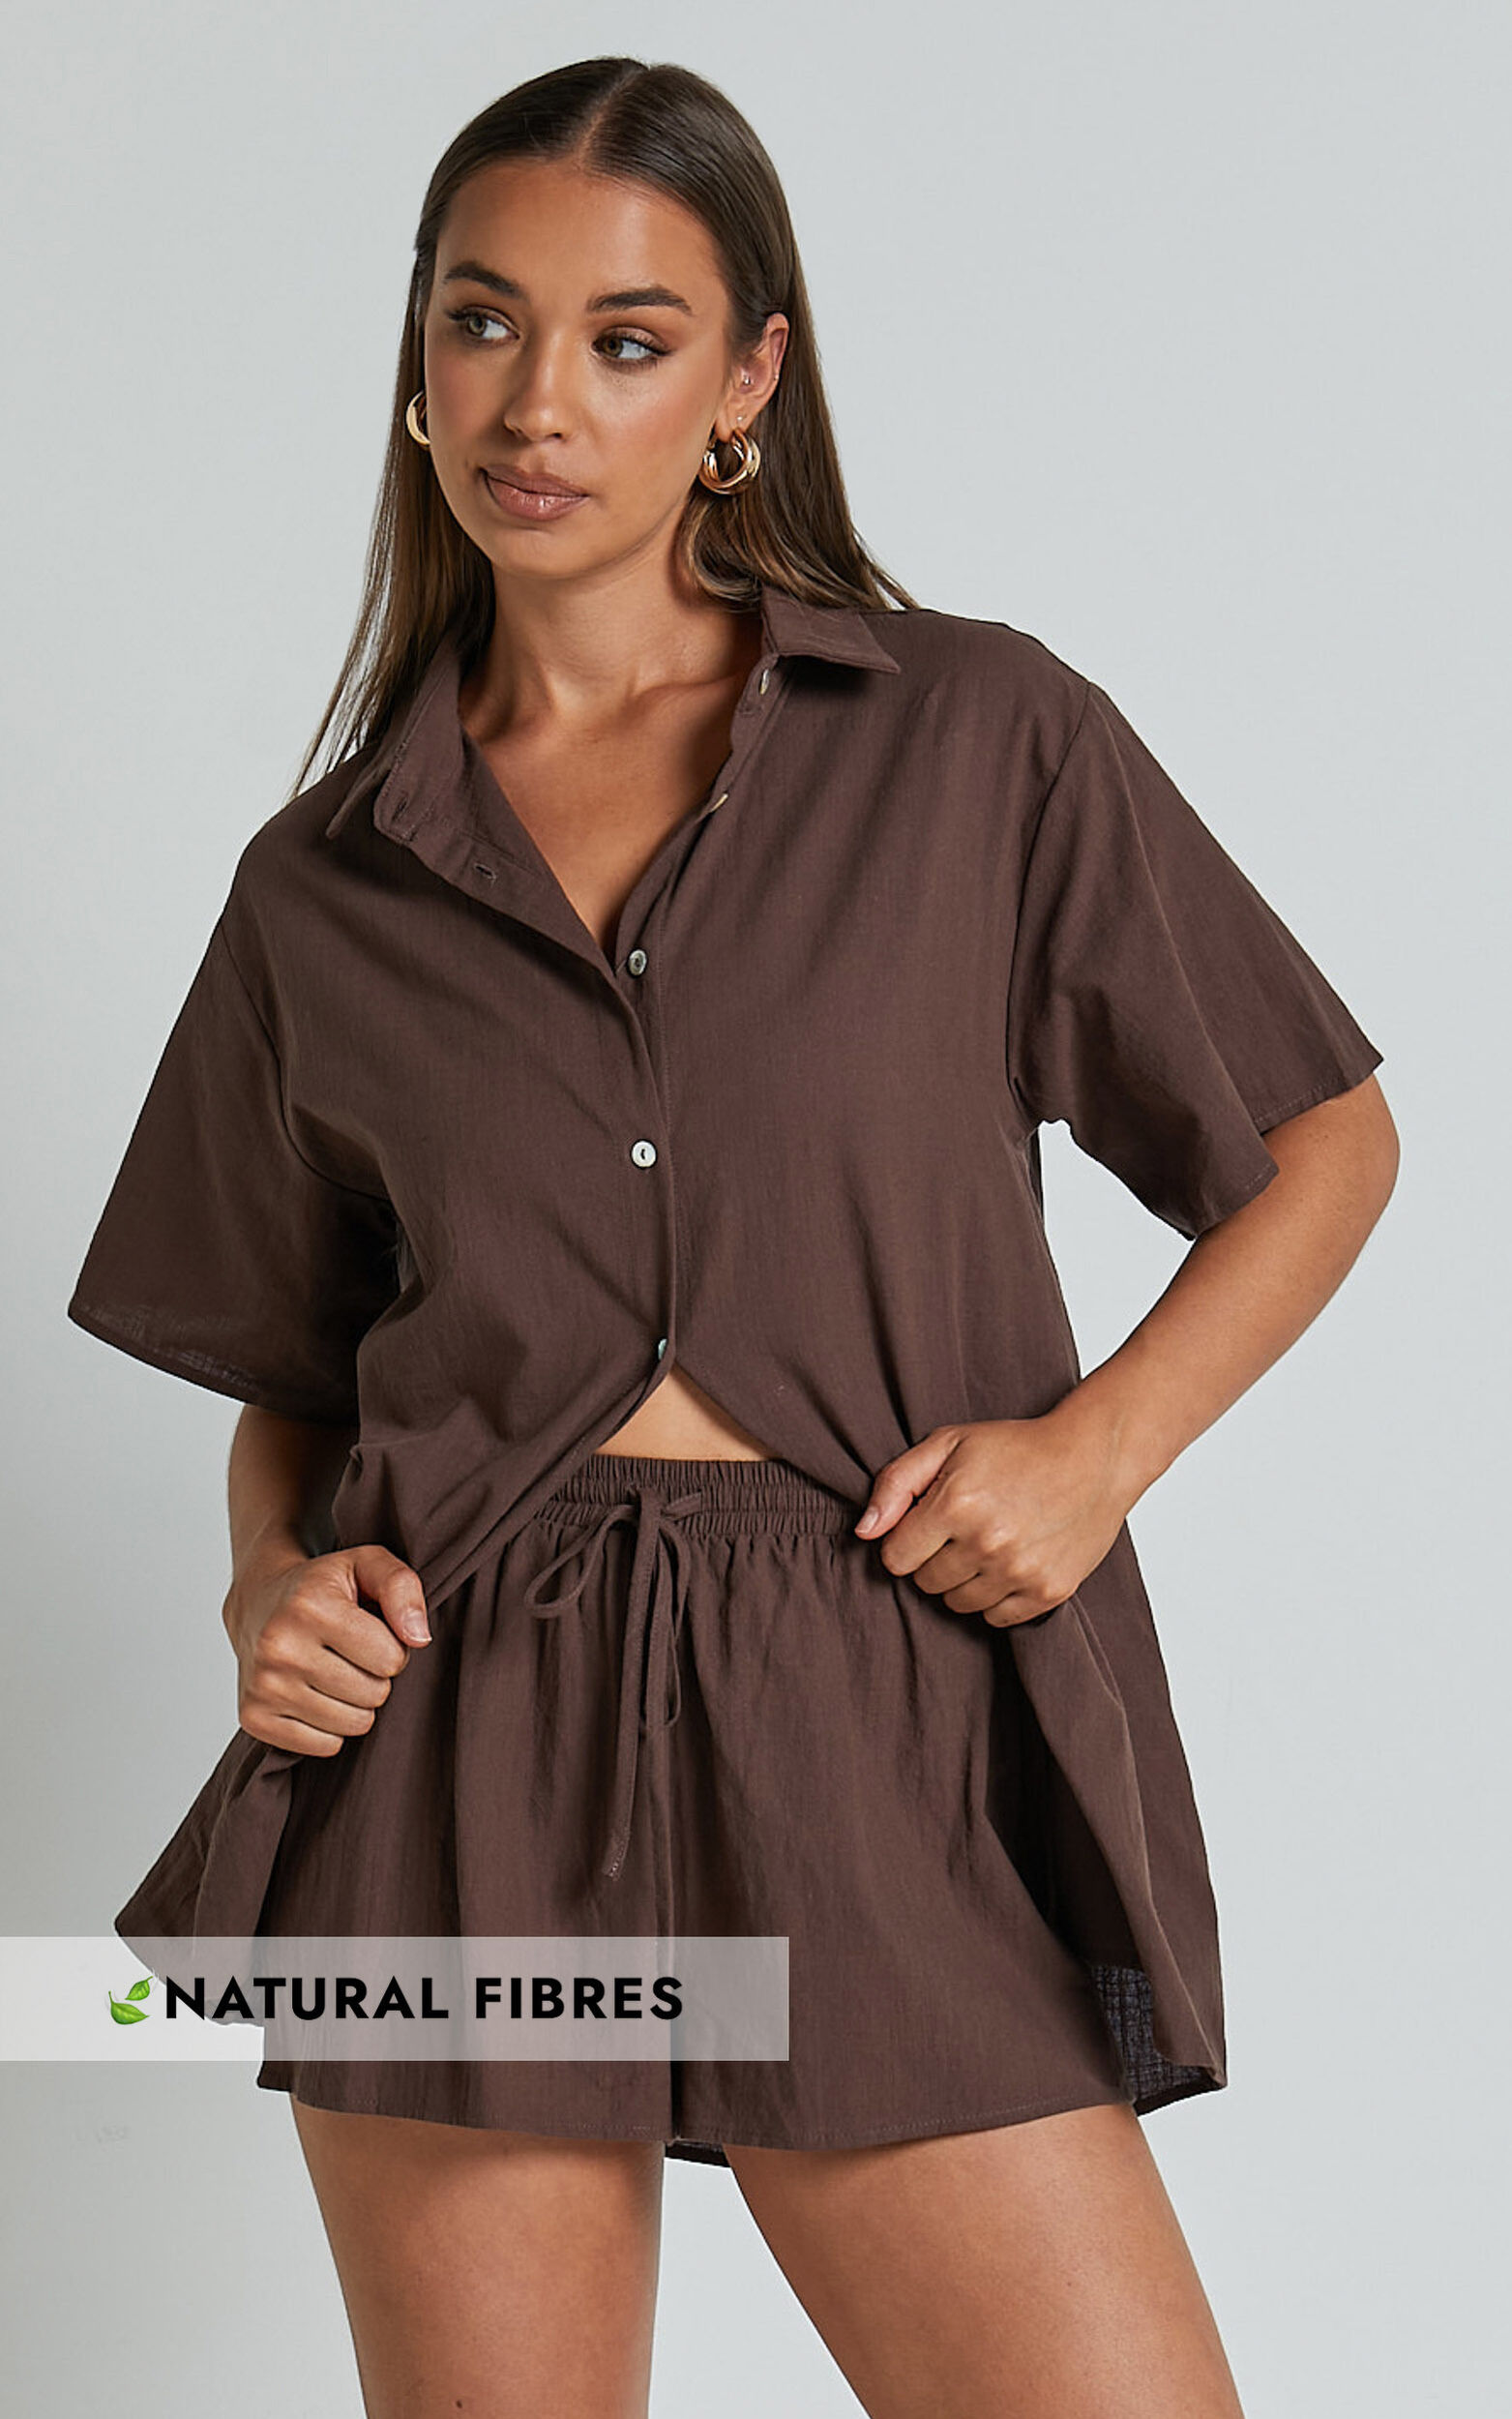 Vina Del Mar Two Piece Set - Linen Look Shirt and Shorts Set in Chocolate - 20, BRN1